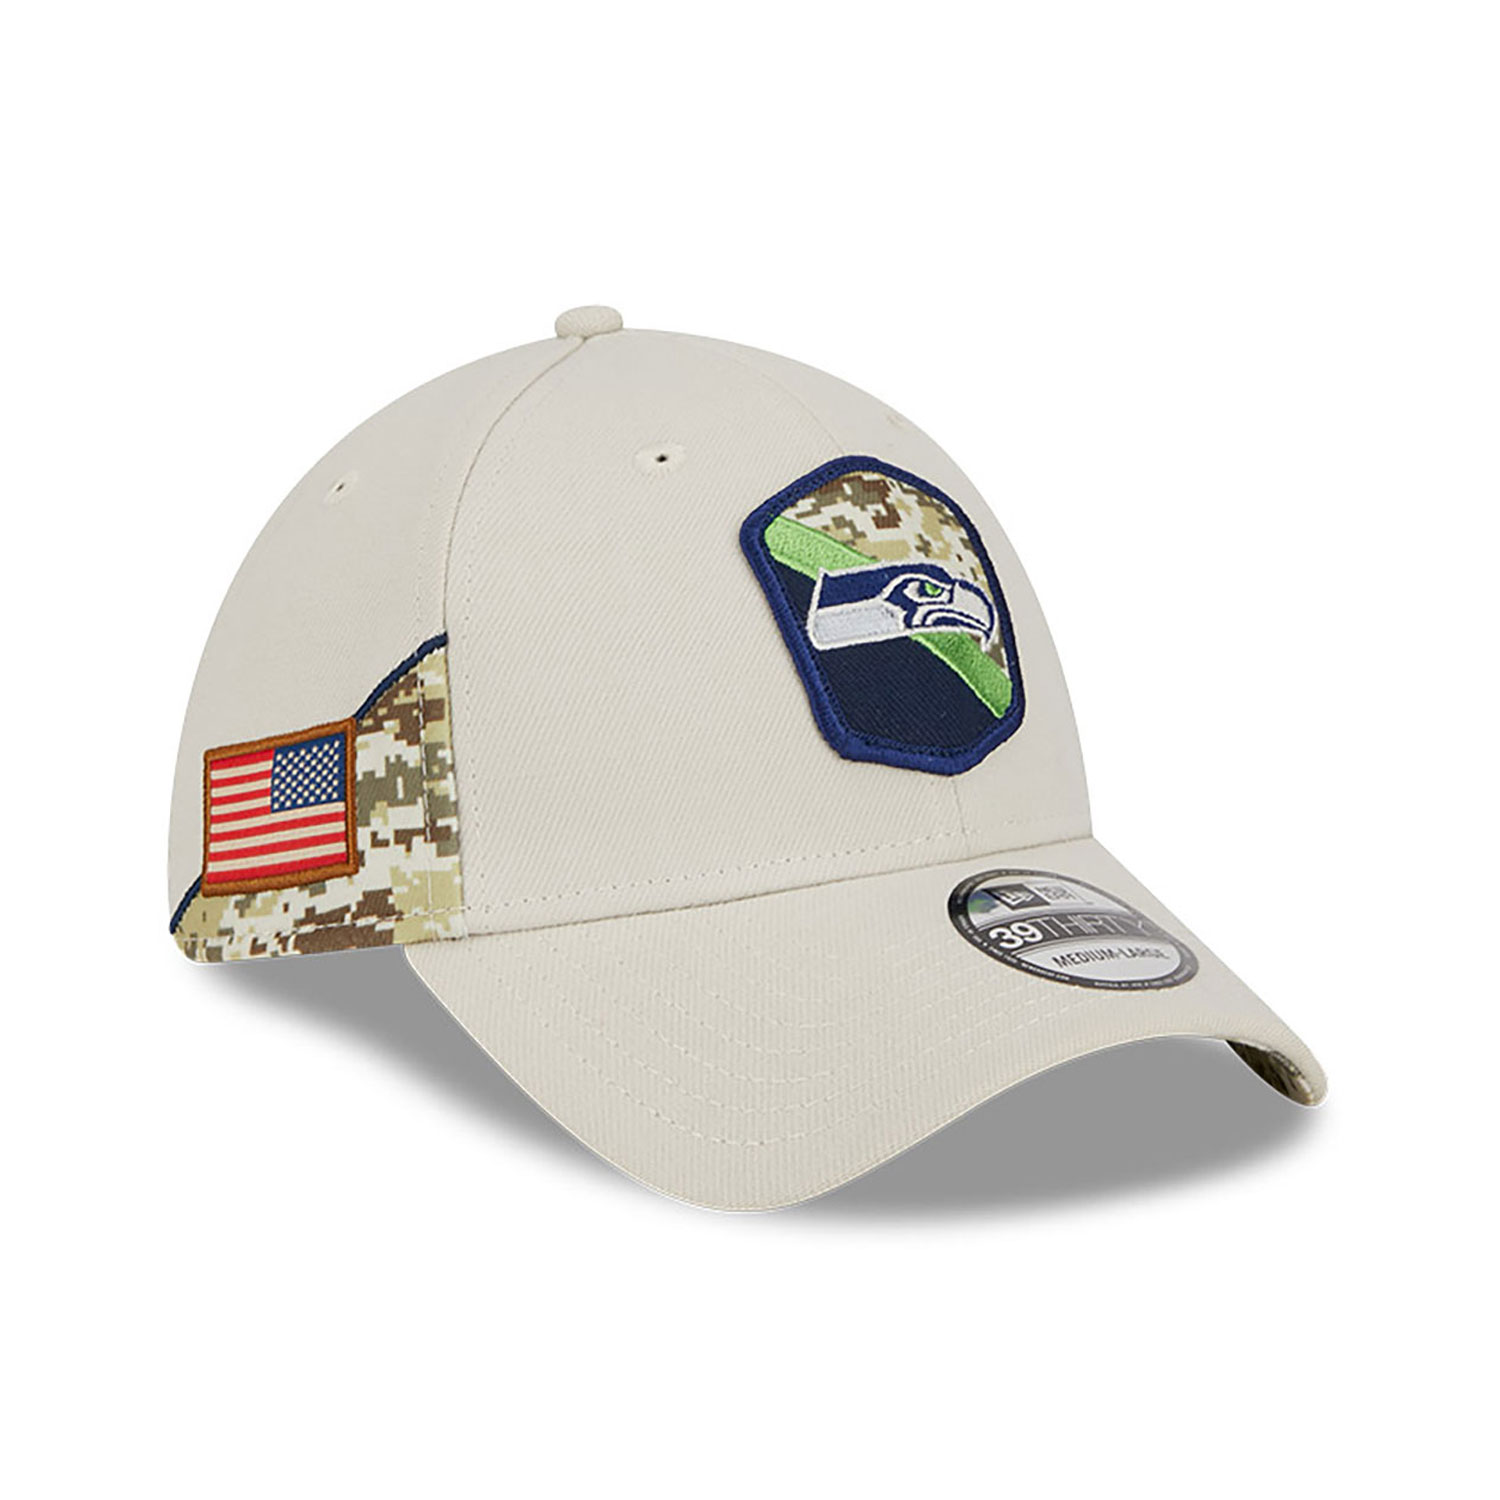 Seattle Seahawks NFL Salute To Service Stone 39THIRTY Stretch Fit Cap